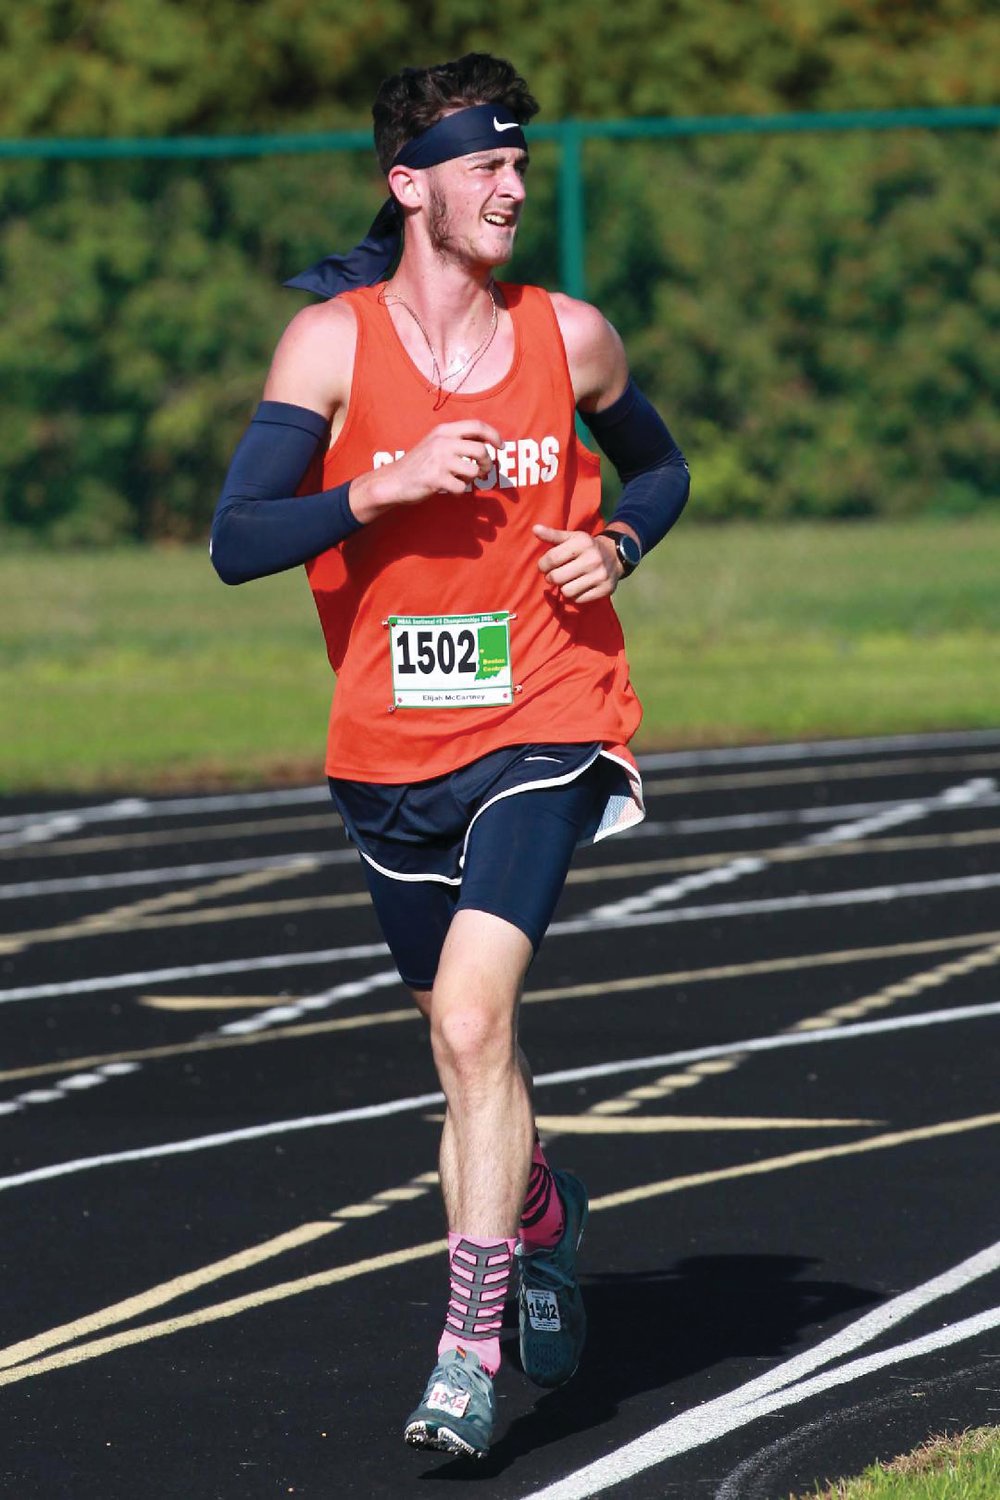 North Montgomery senior Elijah McCartney was second at the Benton Central sectional.